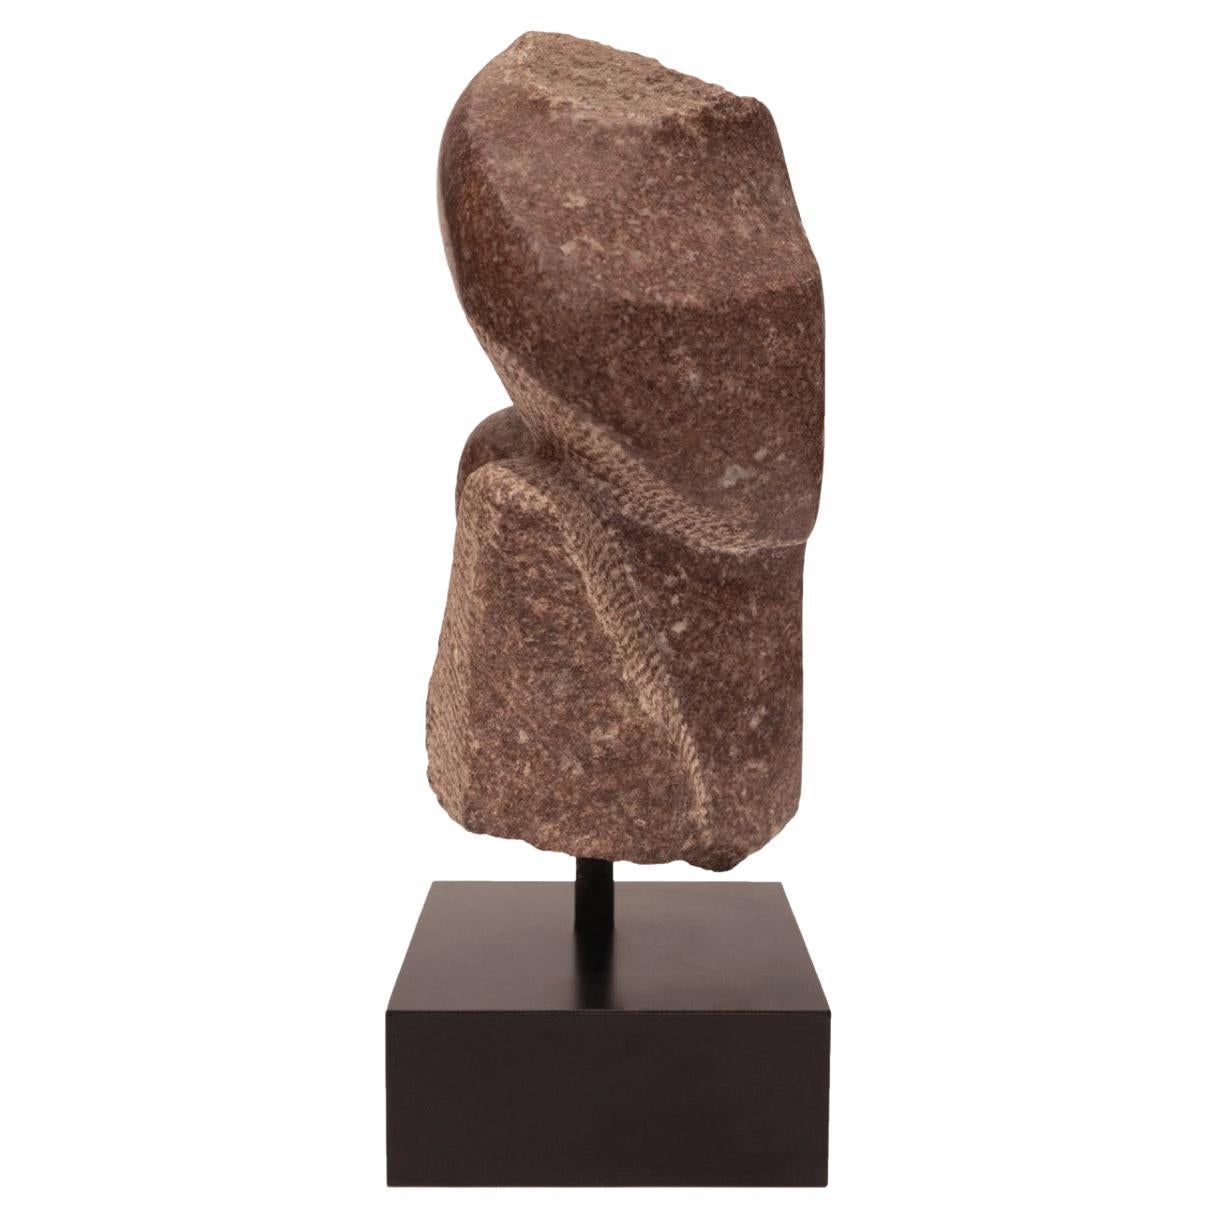 Naomi Feinberg "Morceau" Sculpture in Red Italian Marble 1977 'Signed and Dated'